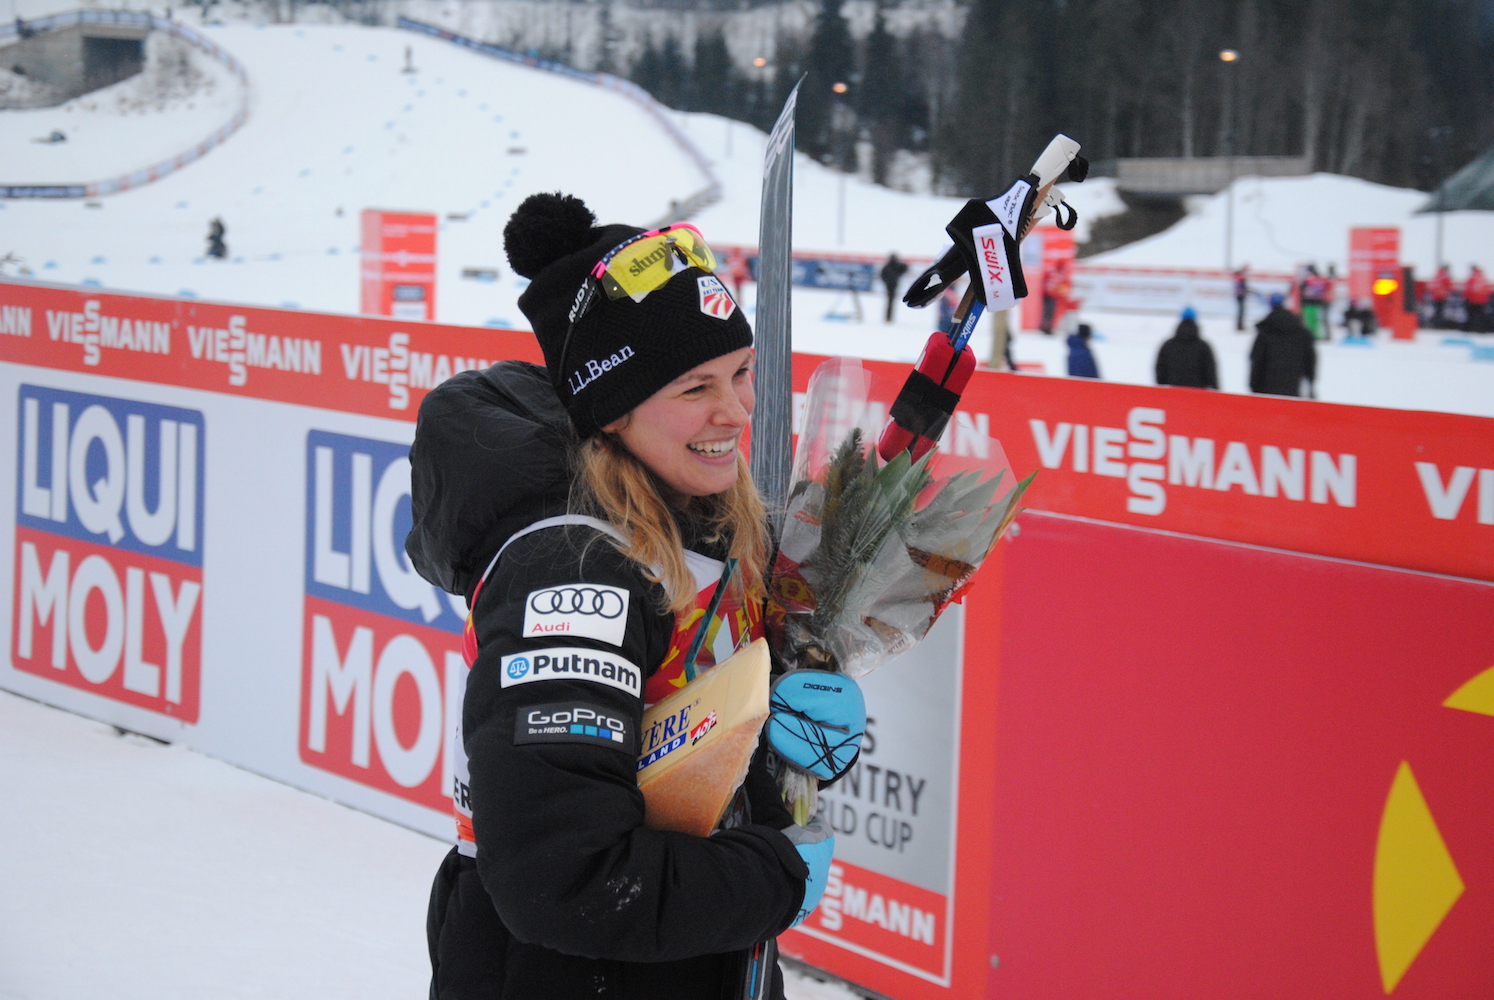 Jessie Diggins (U.S. Ski Team) celebrating her second career World Cup victory after winning the women's 5 k freestyle on Dec. 3 in Lillehammer, Norway. (Photo: Aleks Tangen)